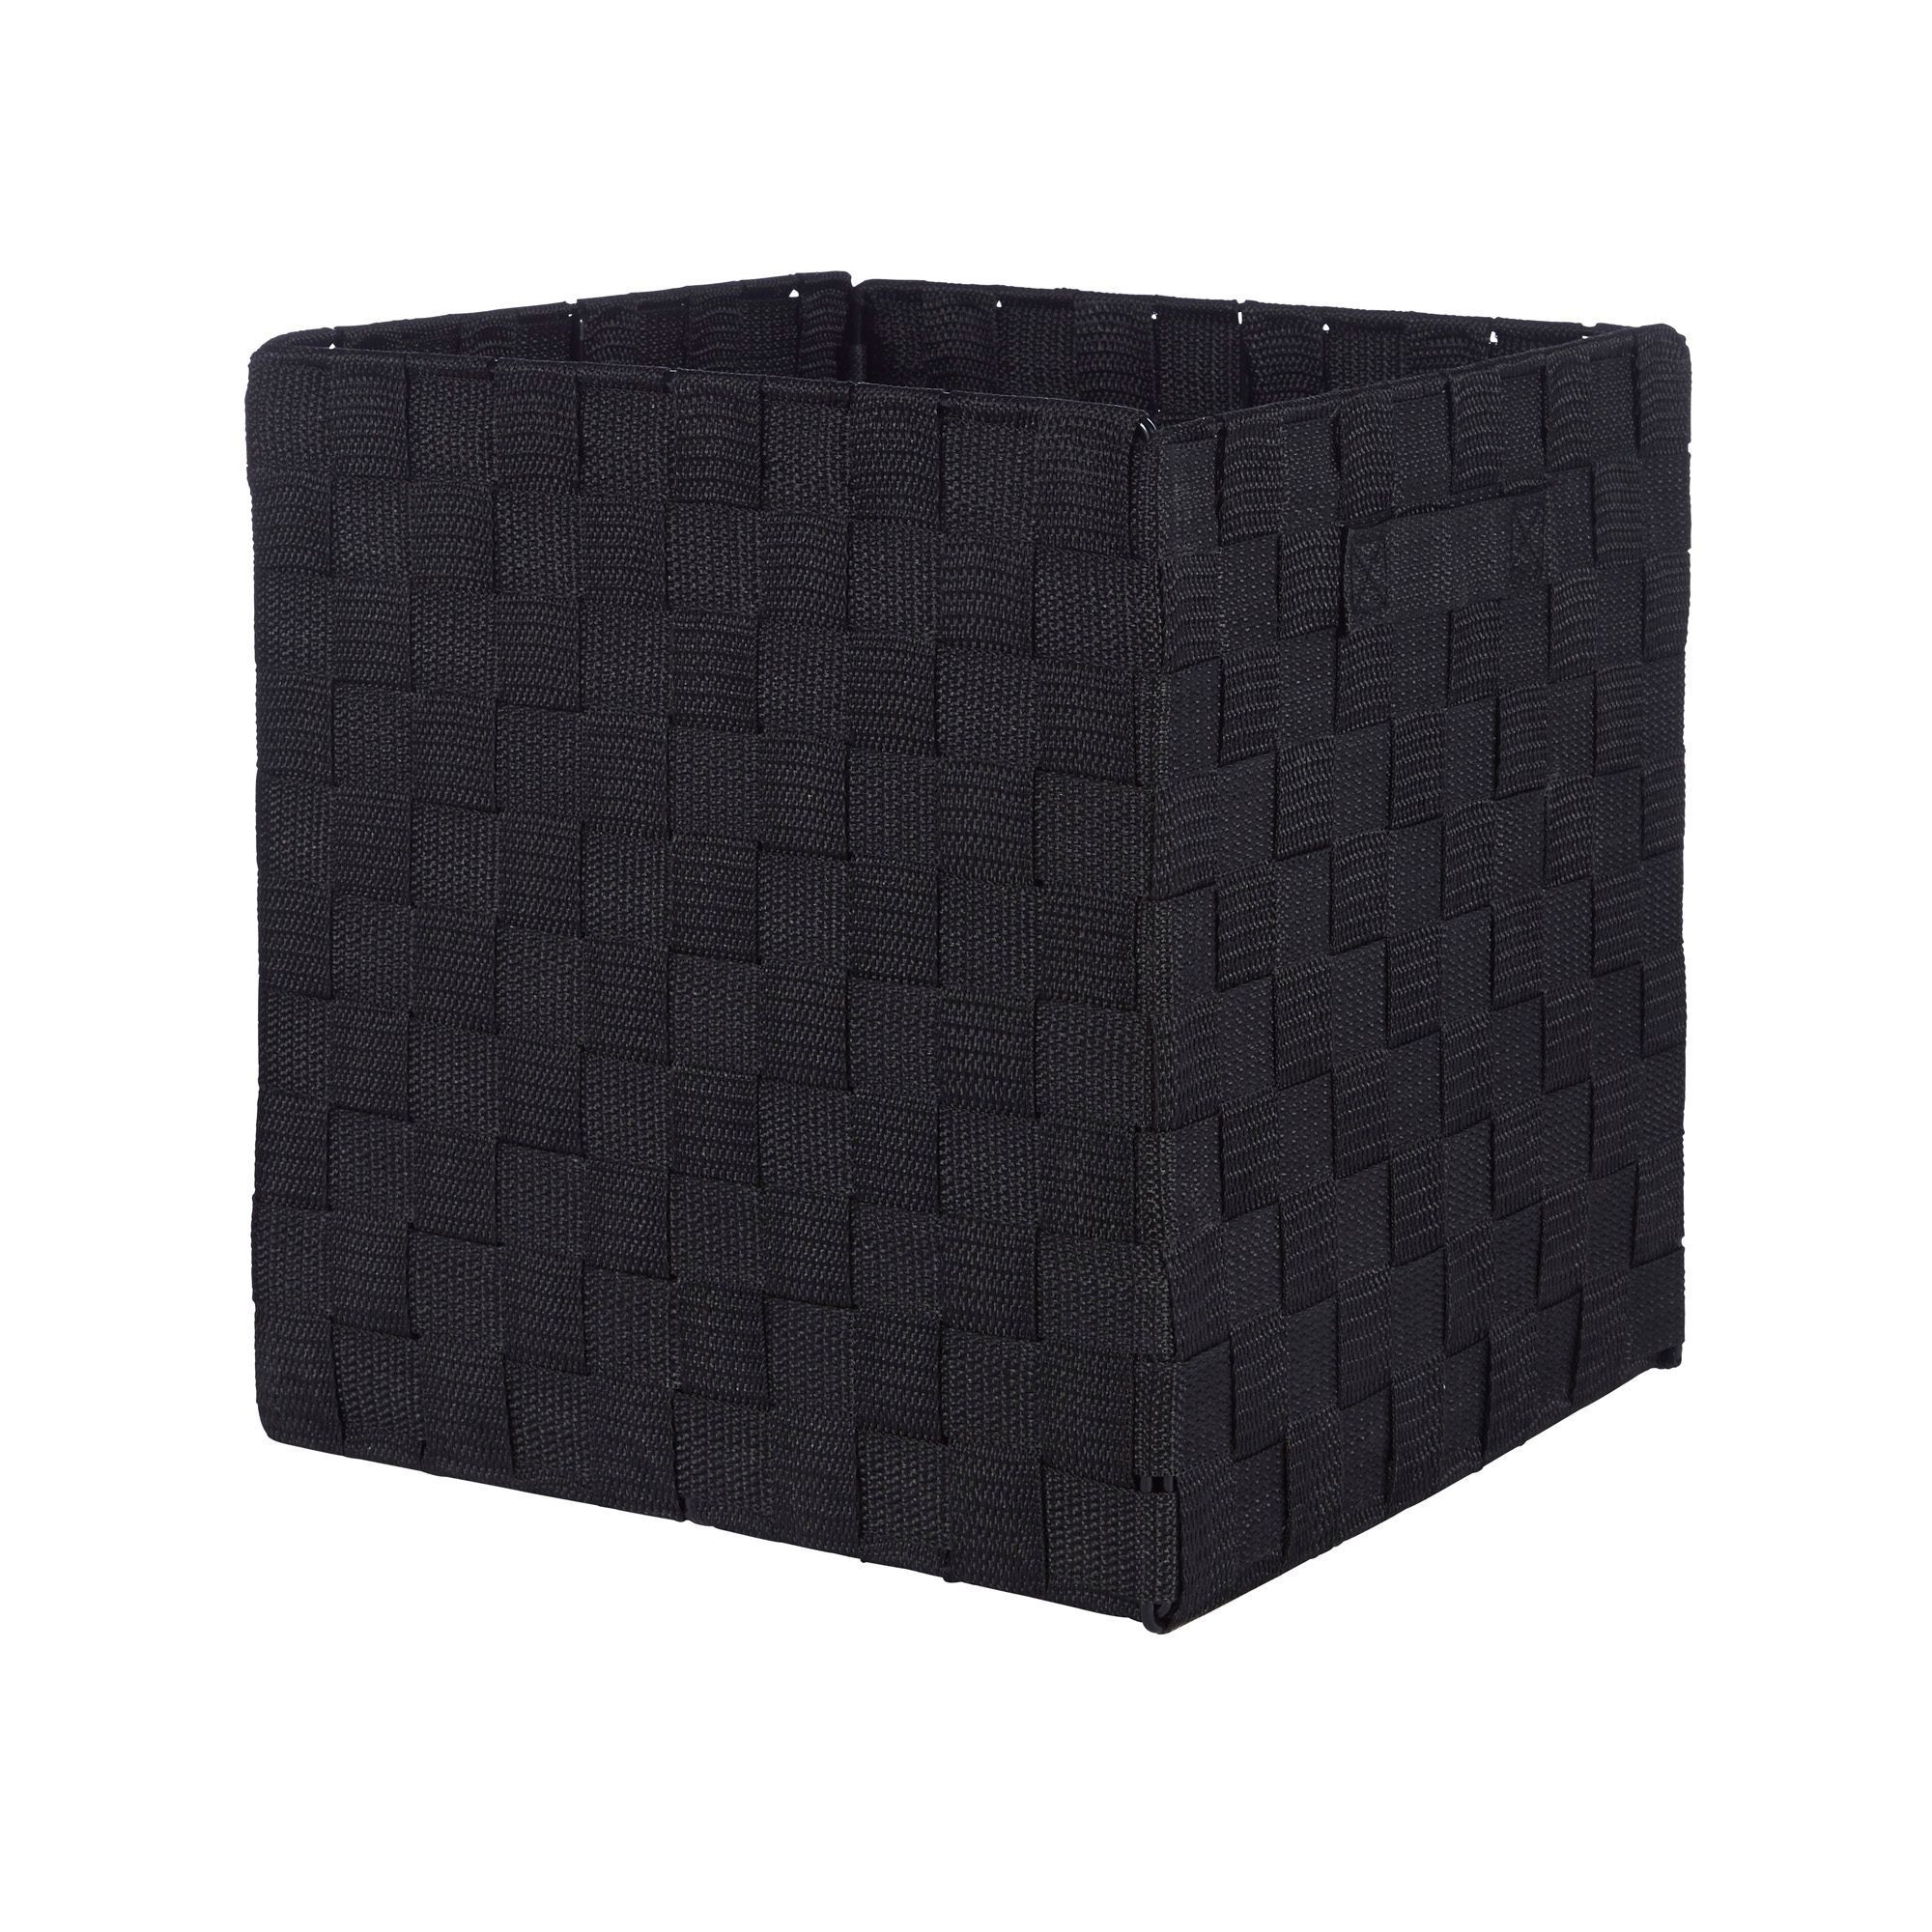 Form Black Non-Woven Fabric & Polyester (Pes) Storage Basket (H)310mm (W)310mm